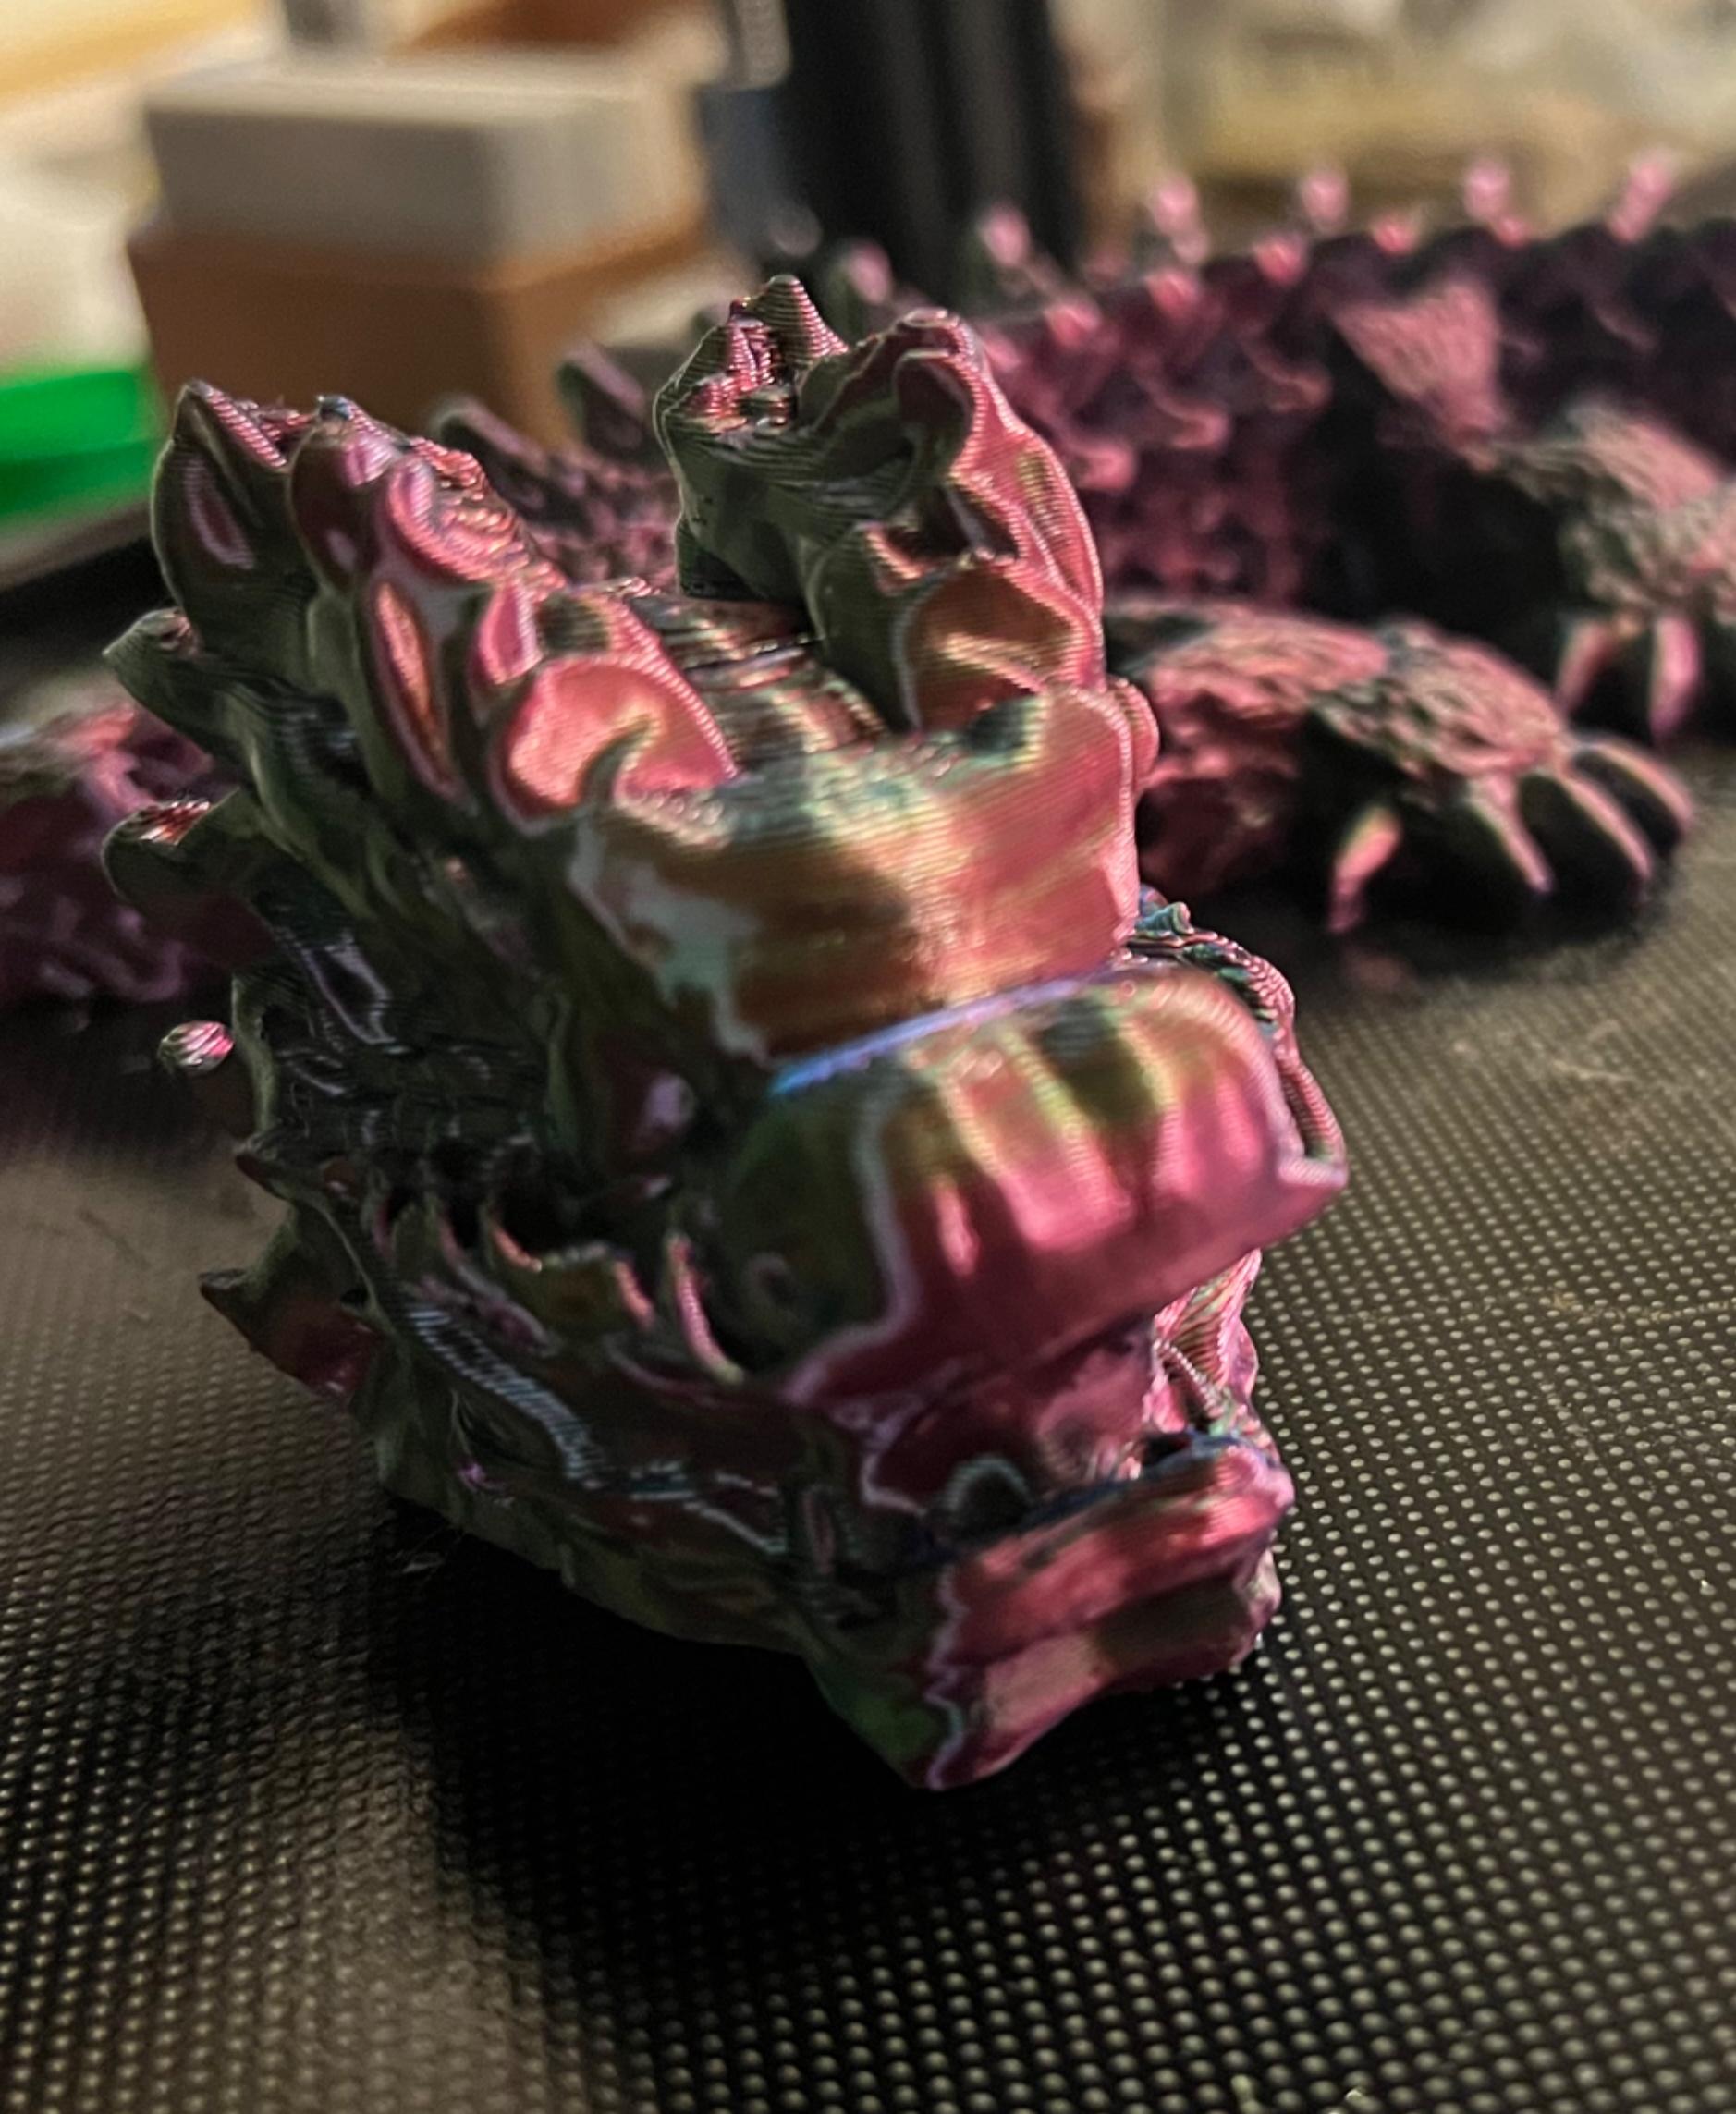 Snowstorm, Winter Dragon - Articulated Dragon Snap-Flex Fidget (Tight Joints) - Snowstorm in Eryone triextrusion Red, Blue, Green. - 3d model